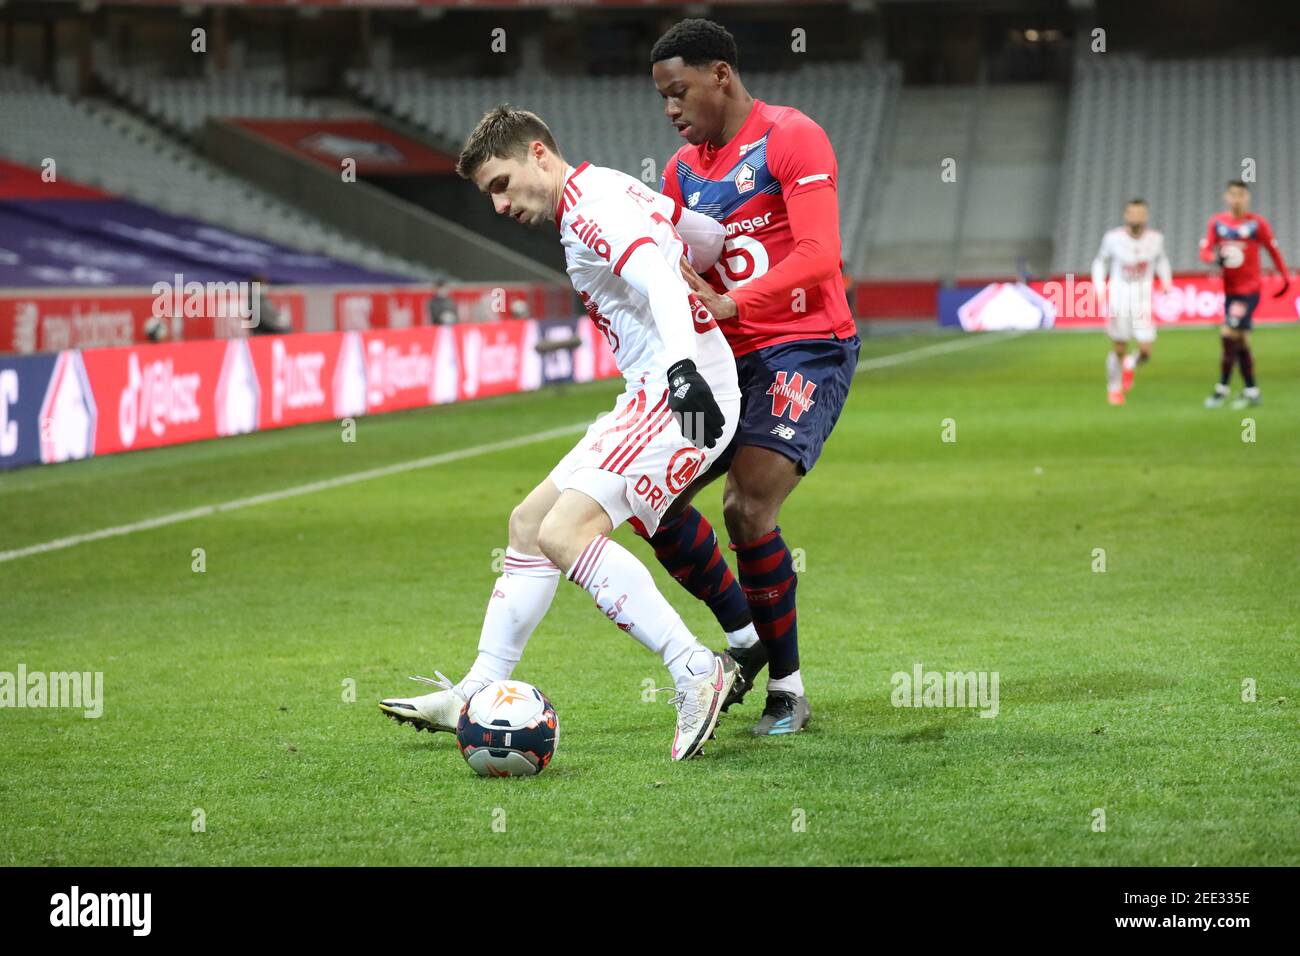 Jonathan DAVID 9 LOSC during the French championship Ligue 1 football match  between Lille OSC and Stade Brestois 29 on Februar / LM Stock Photo - Alamy